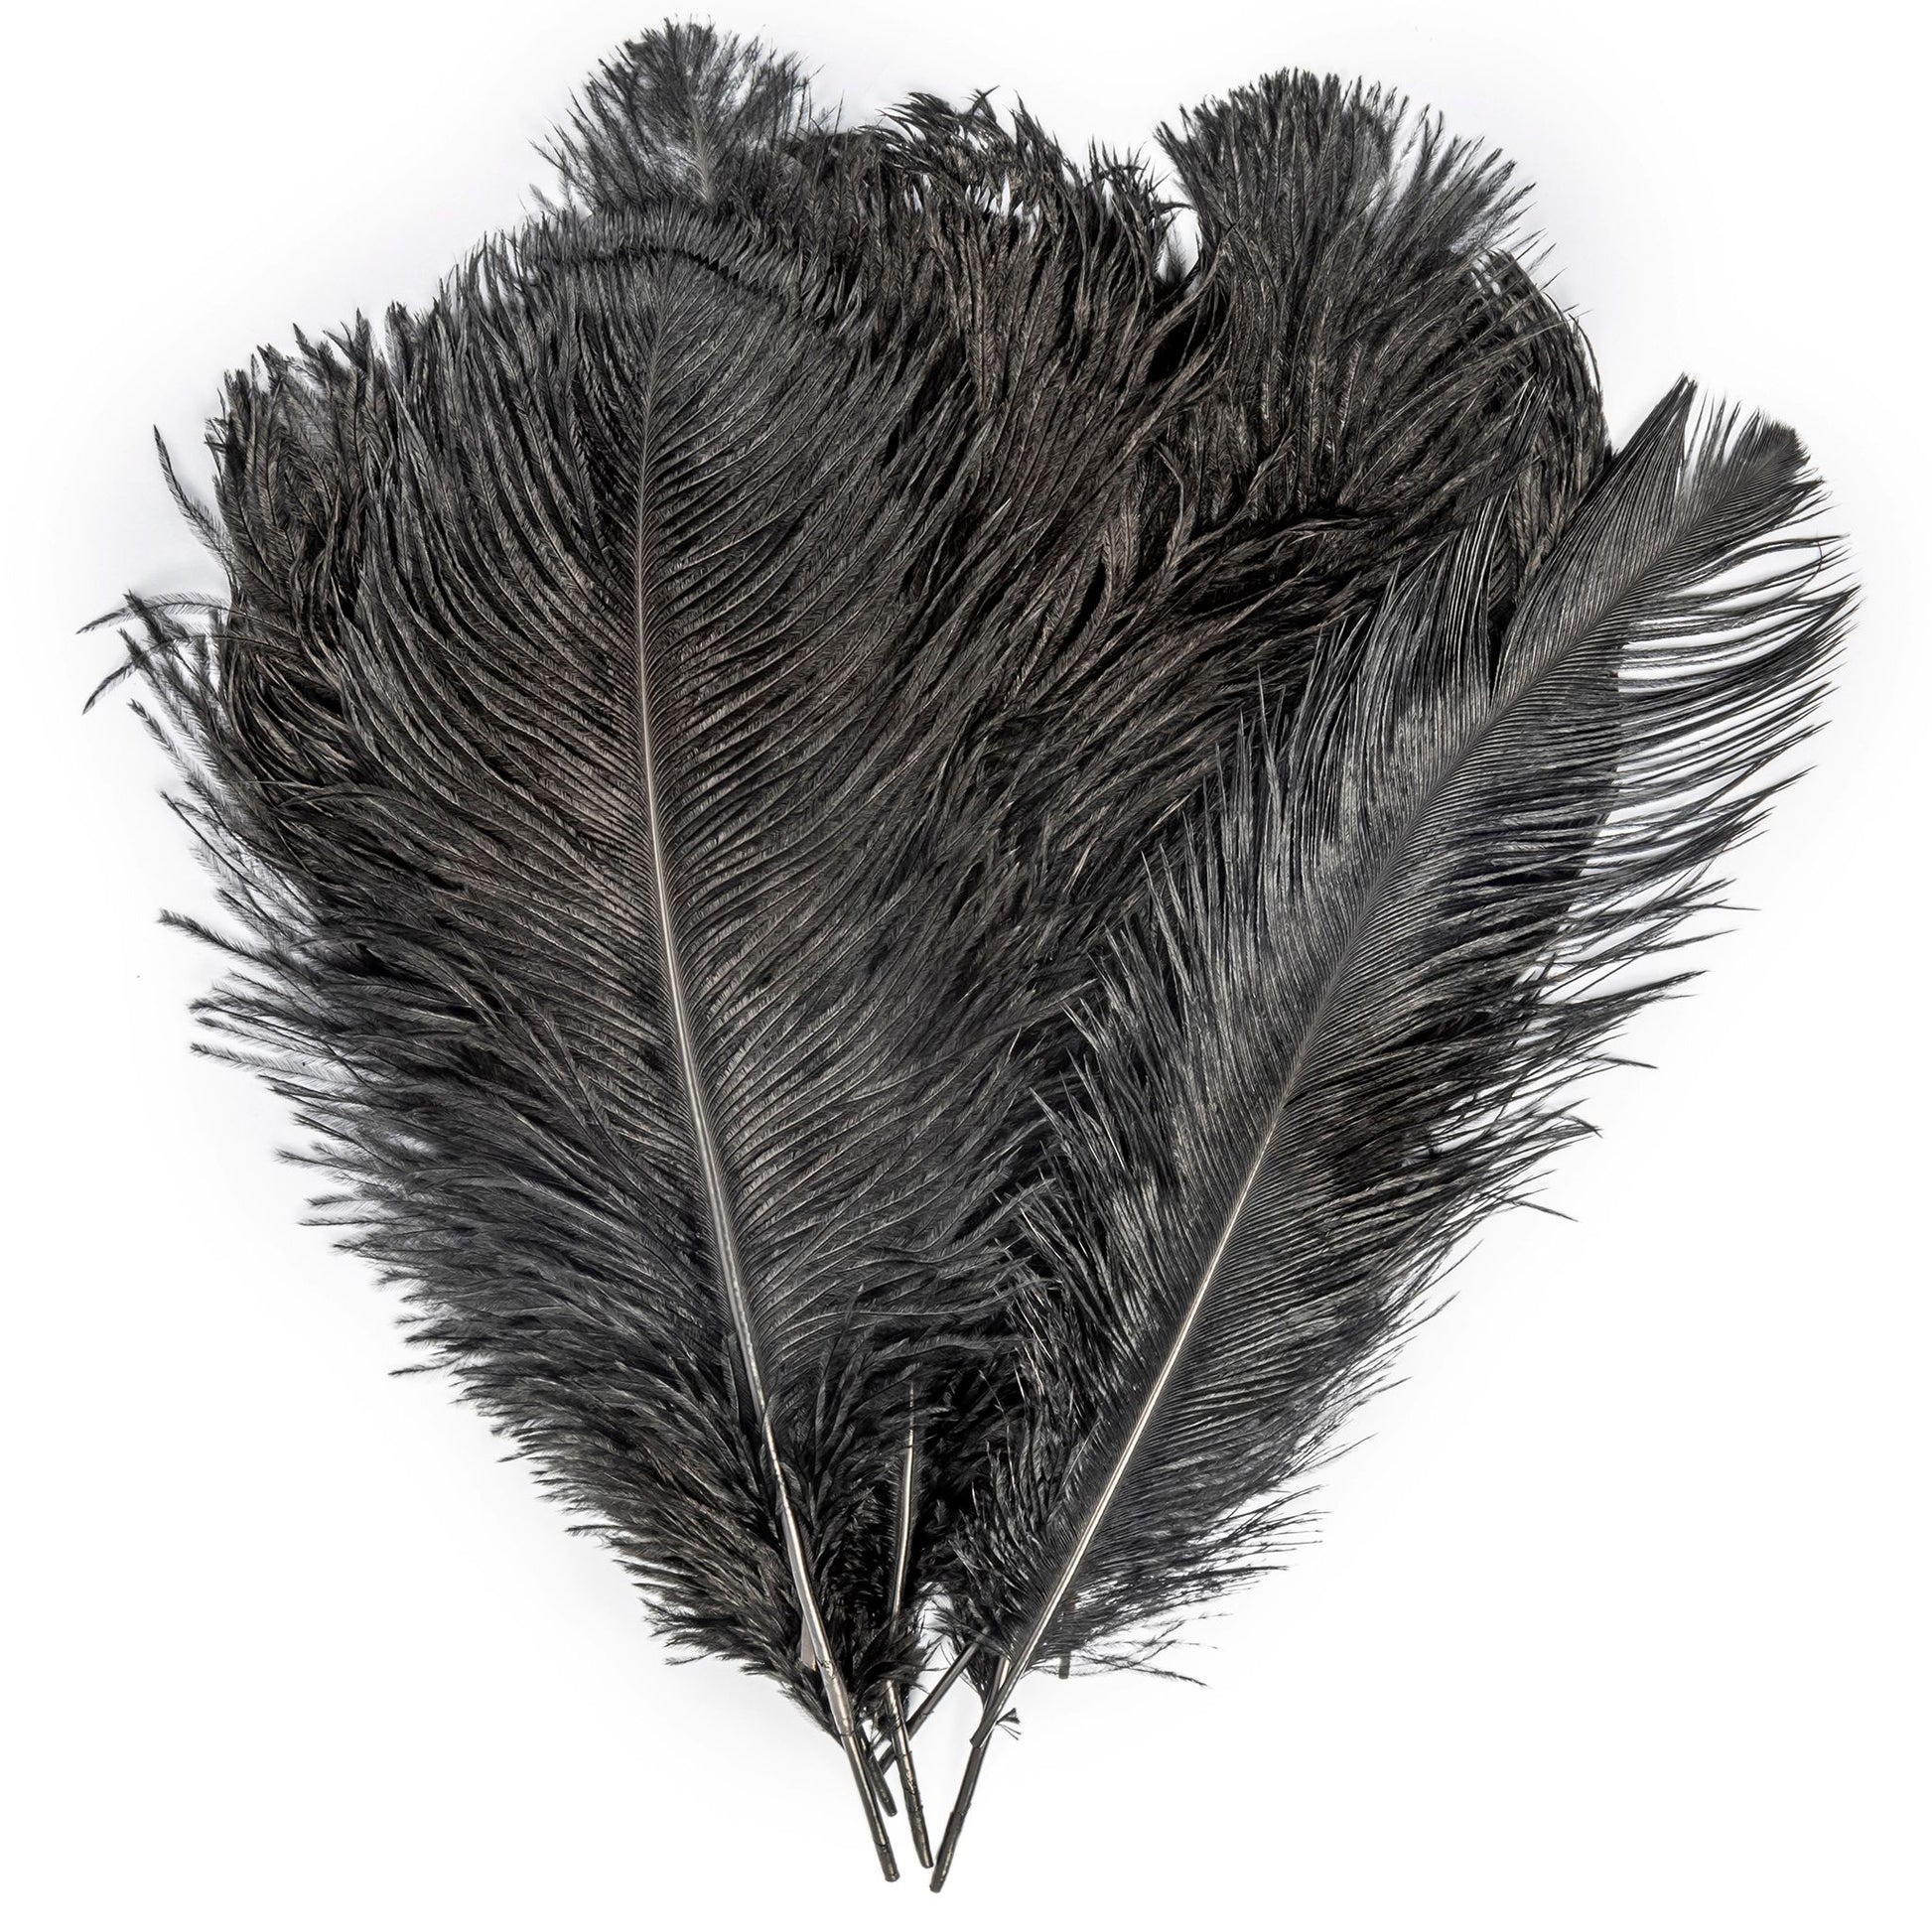 Ostrich Plumes 14-16